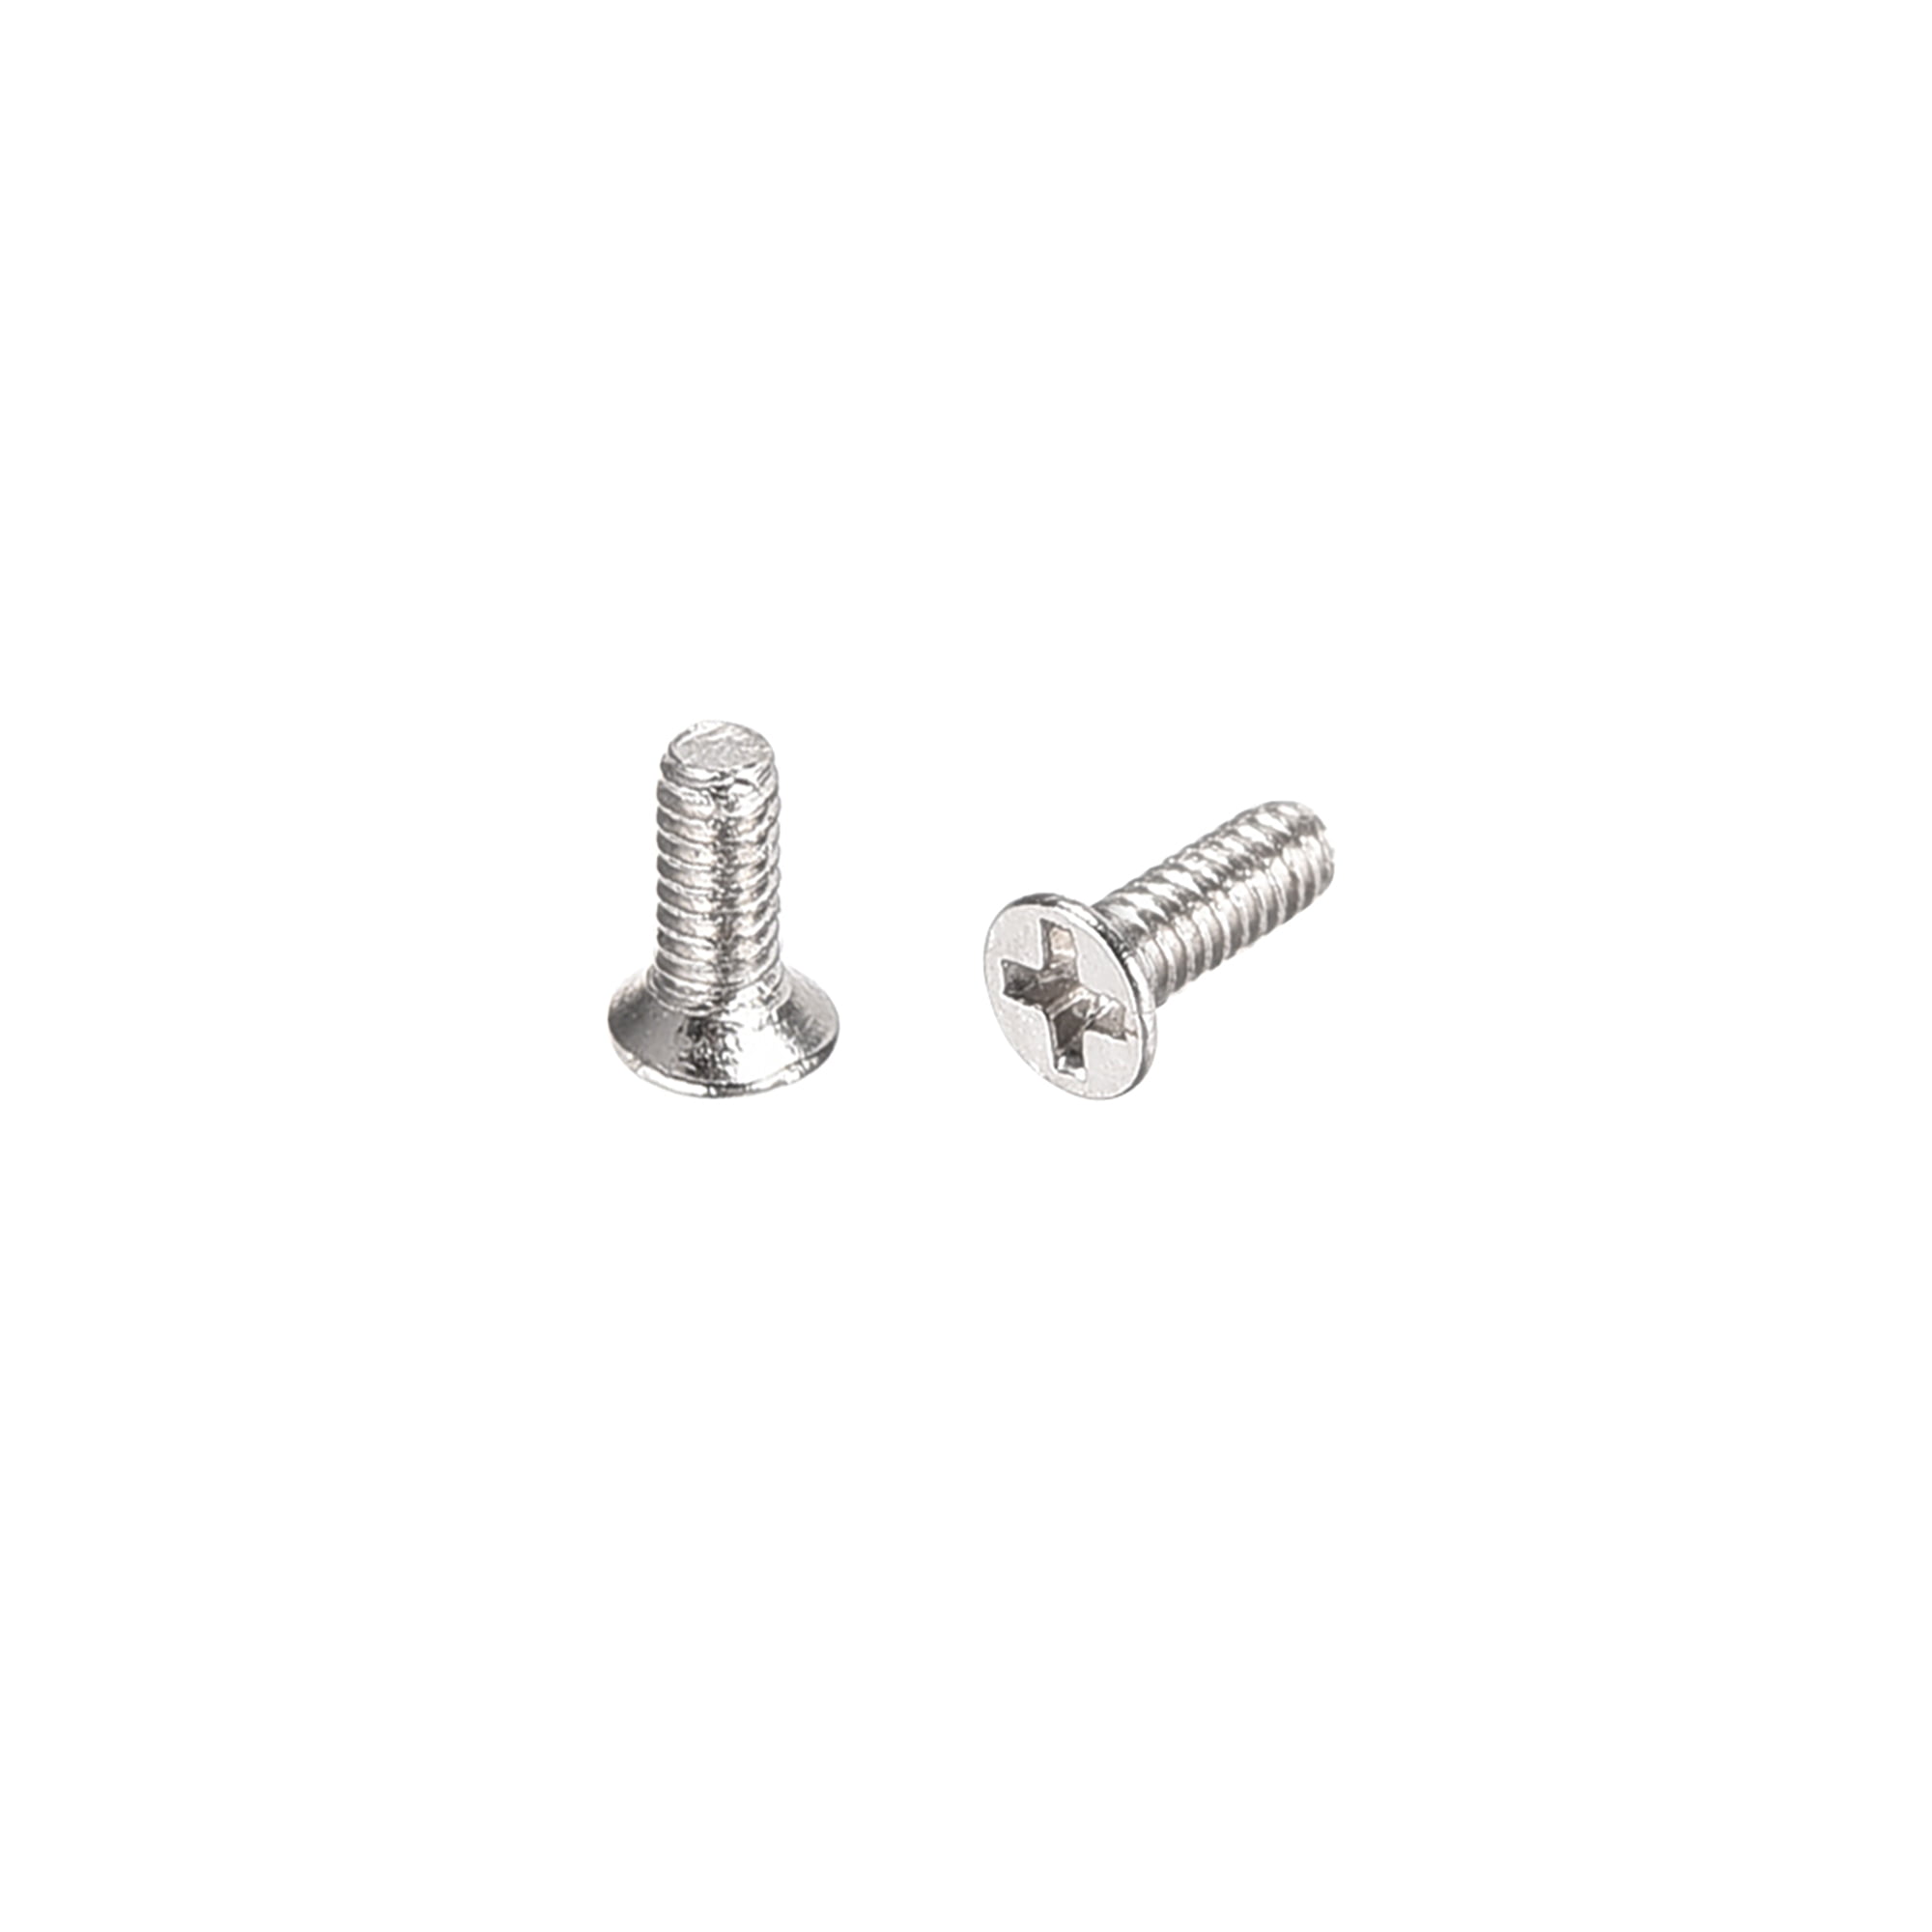 M1 x 3mm Nickel Plated Phillips Self-tapping Small Wood Screws 